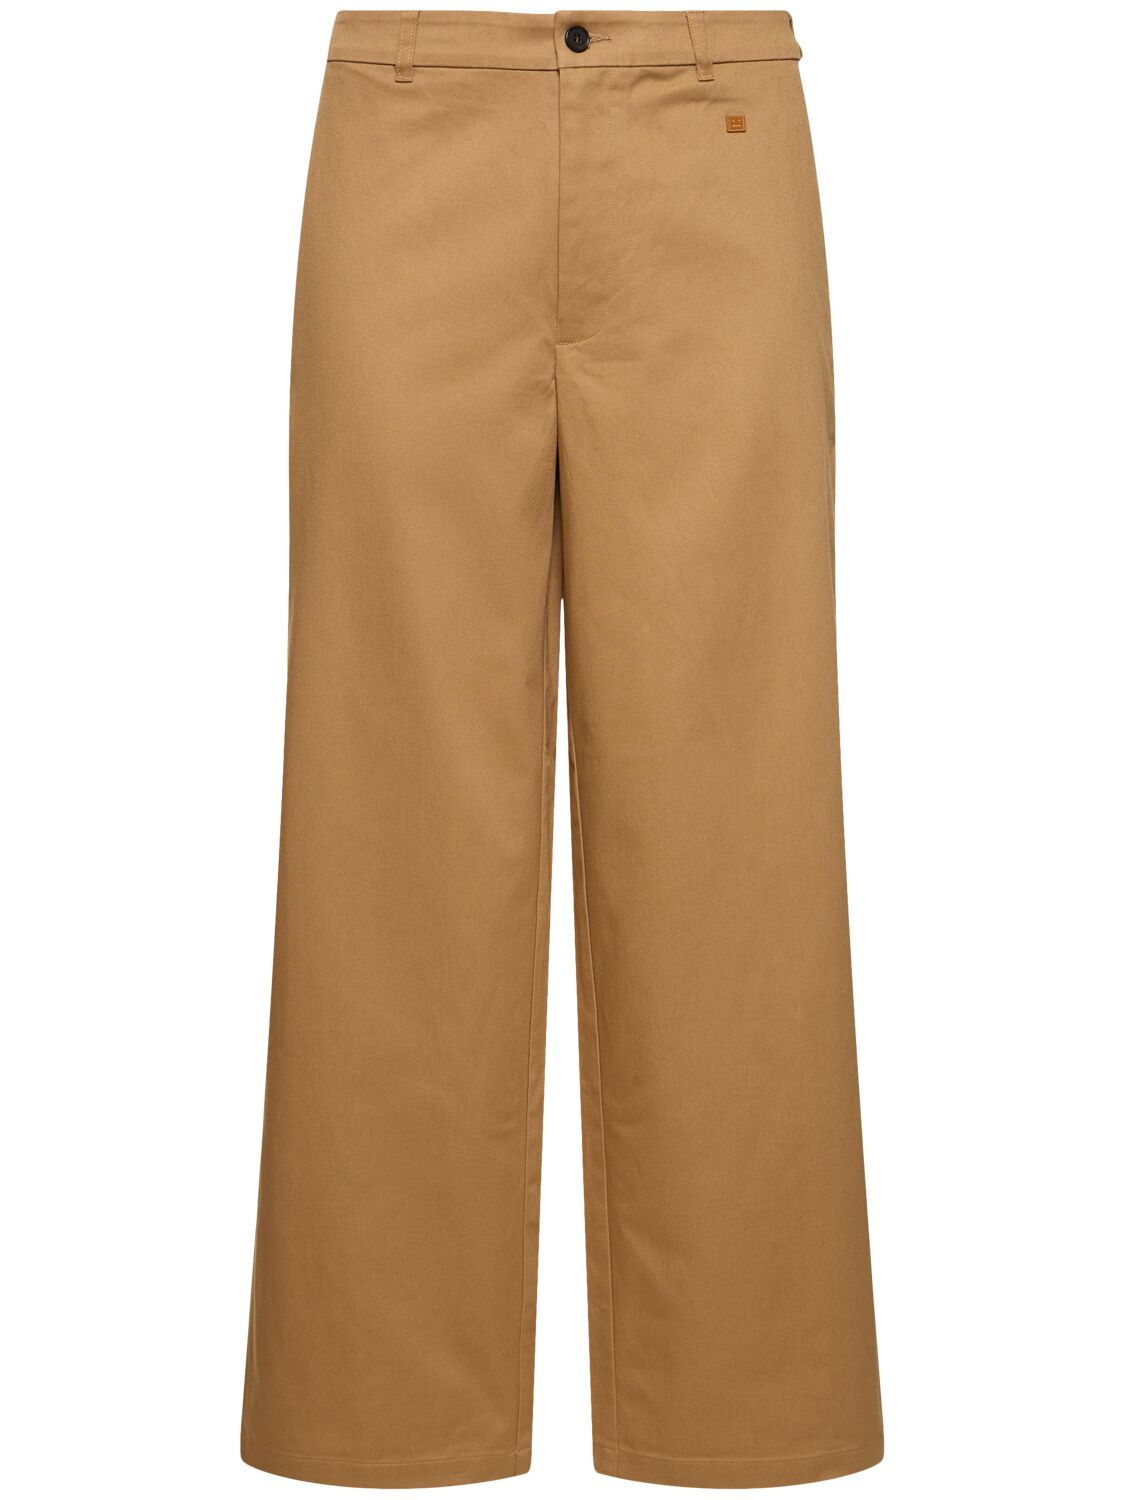 Acne Studios Pablo Cotton Workwear Pants In Camel Brown